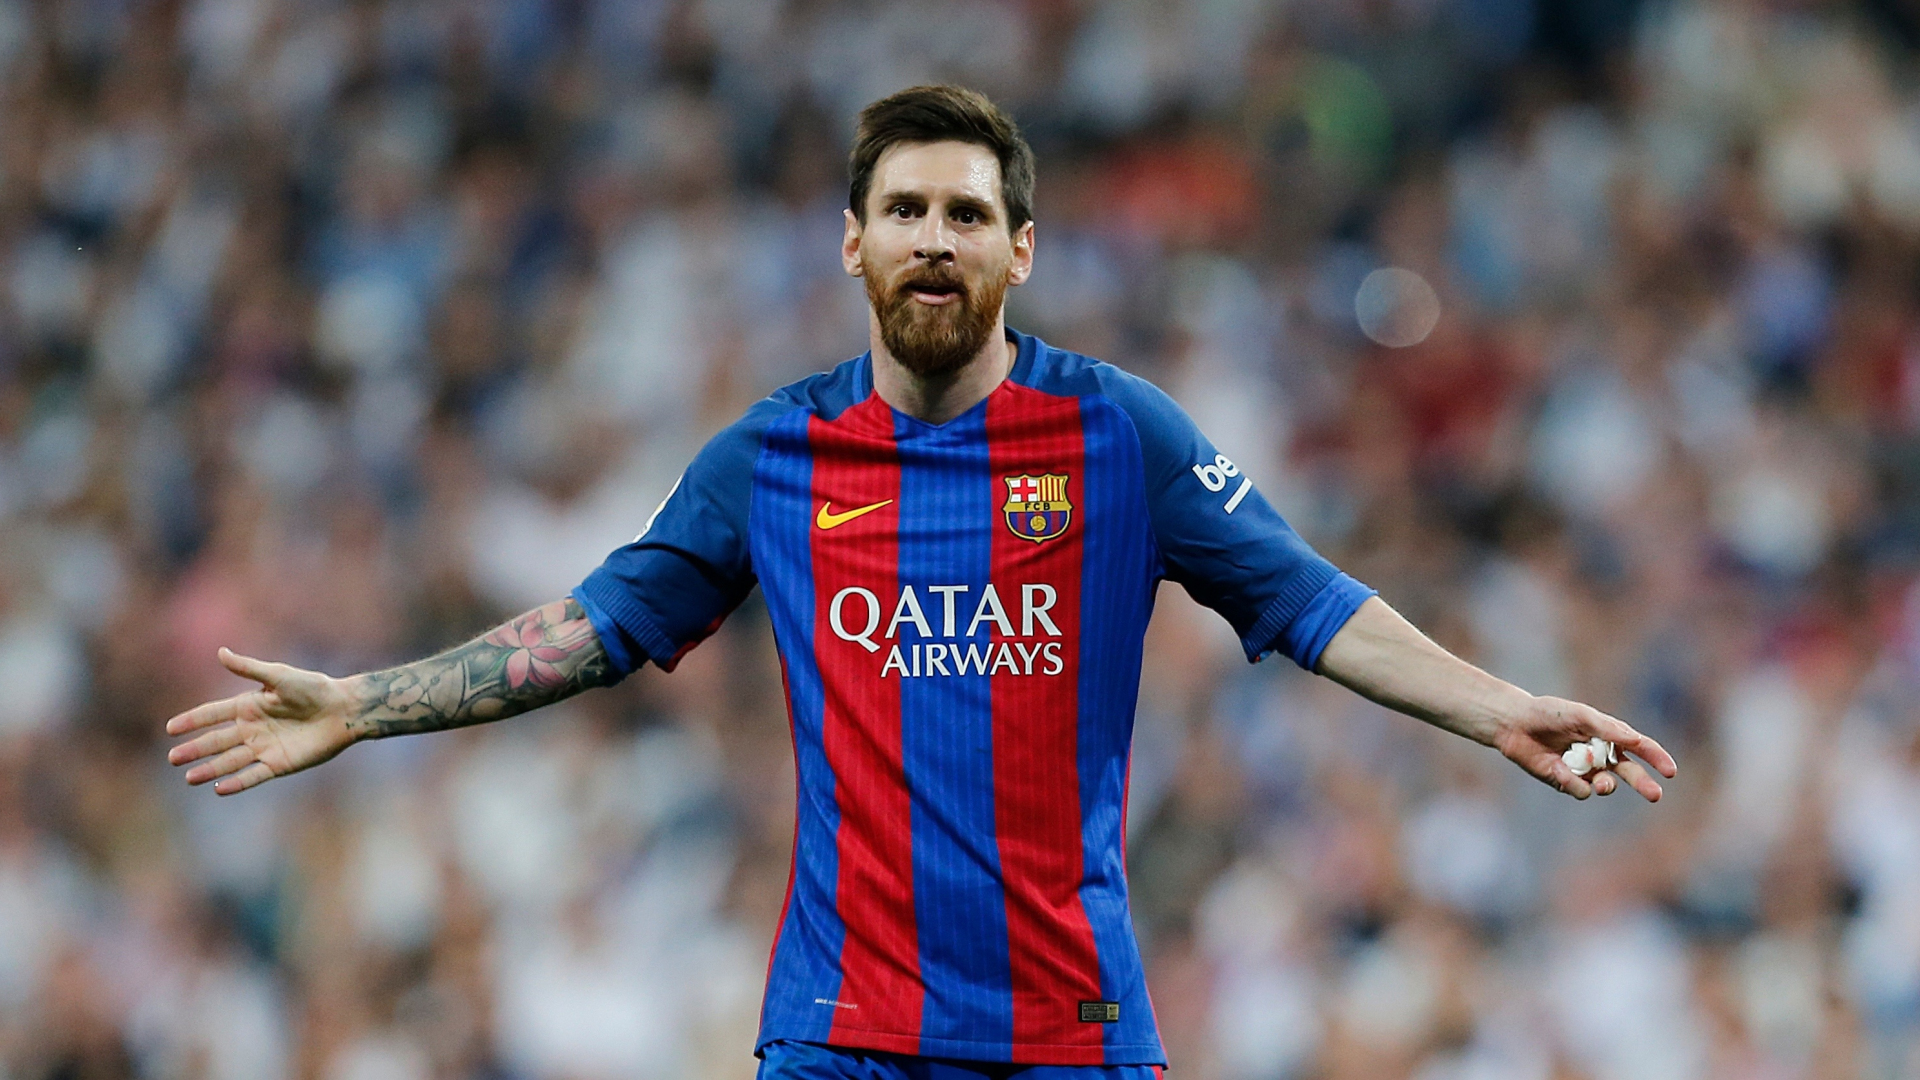 Download wallpaper 1920x1080 celebrity, lionel messi, football player, full  hd, hdtv, fhd, 1080p wallpaper, 1920x1080 hd background, 9560